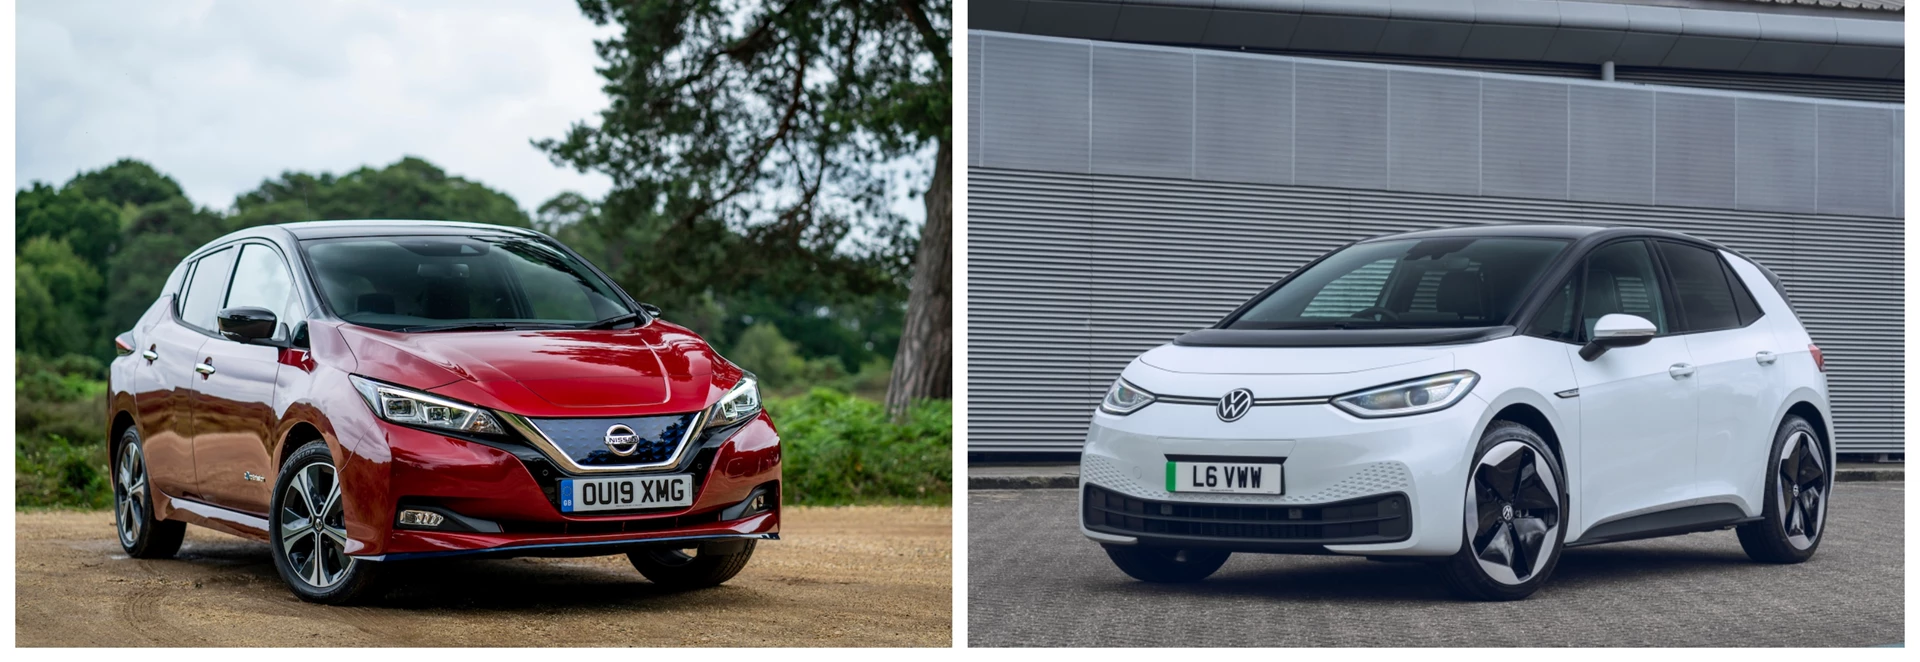 Volkswagen ID.3 vs Nissan Leaf: Who makes the best electric family hatchback? 